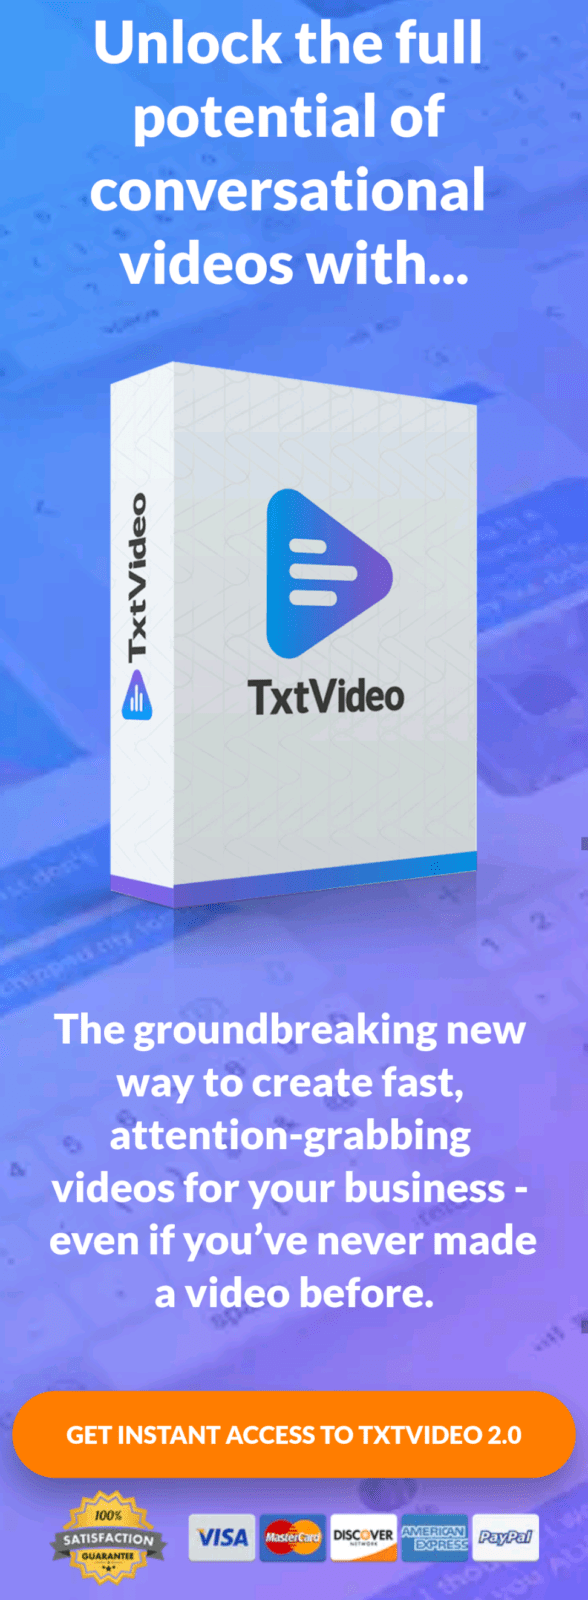 TxtVideo 2.0 : Want to create videos that drive massive levels of traffic, engagement, and sales? THIS WORLD-FIRST SOFTWARE TAPS RIGHT INTO HUMAN EMOTIONS AND INTRIGUE-GRABBING ATTENTION LIKE NOTHING YOU’VE EVER SEEN BEFORE Want to create videos that drive massive levels of traffic, engagement, and sales? TxtVideo's breakthrough technology solves the biggest problem with creating videos today GET INSTANT ACCESS TO TXTVIDEO 2.0 Explode your audience engagement with exciting SMS-style videos that are so intriguing people can’t look away